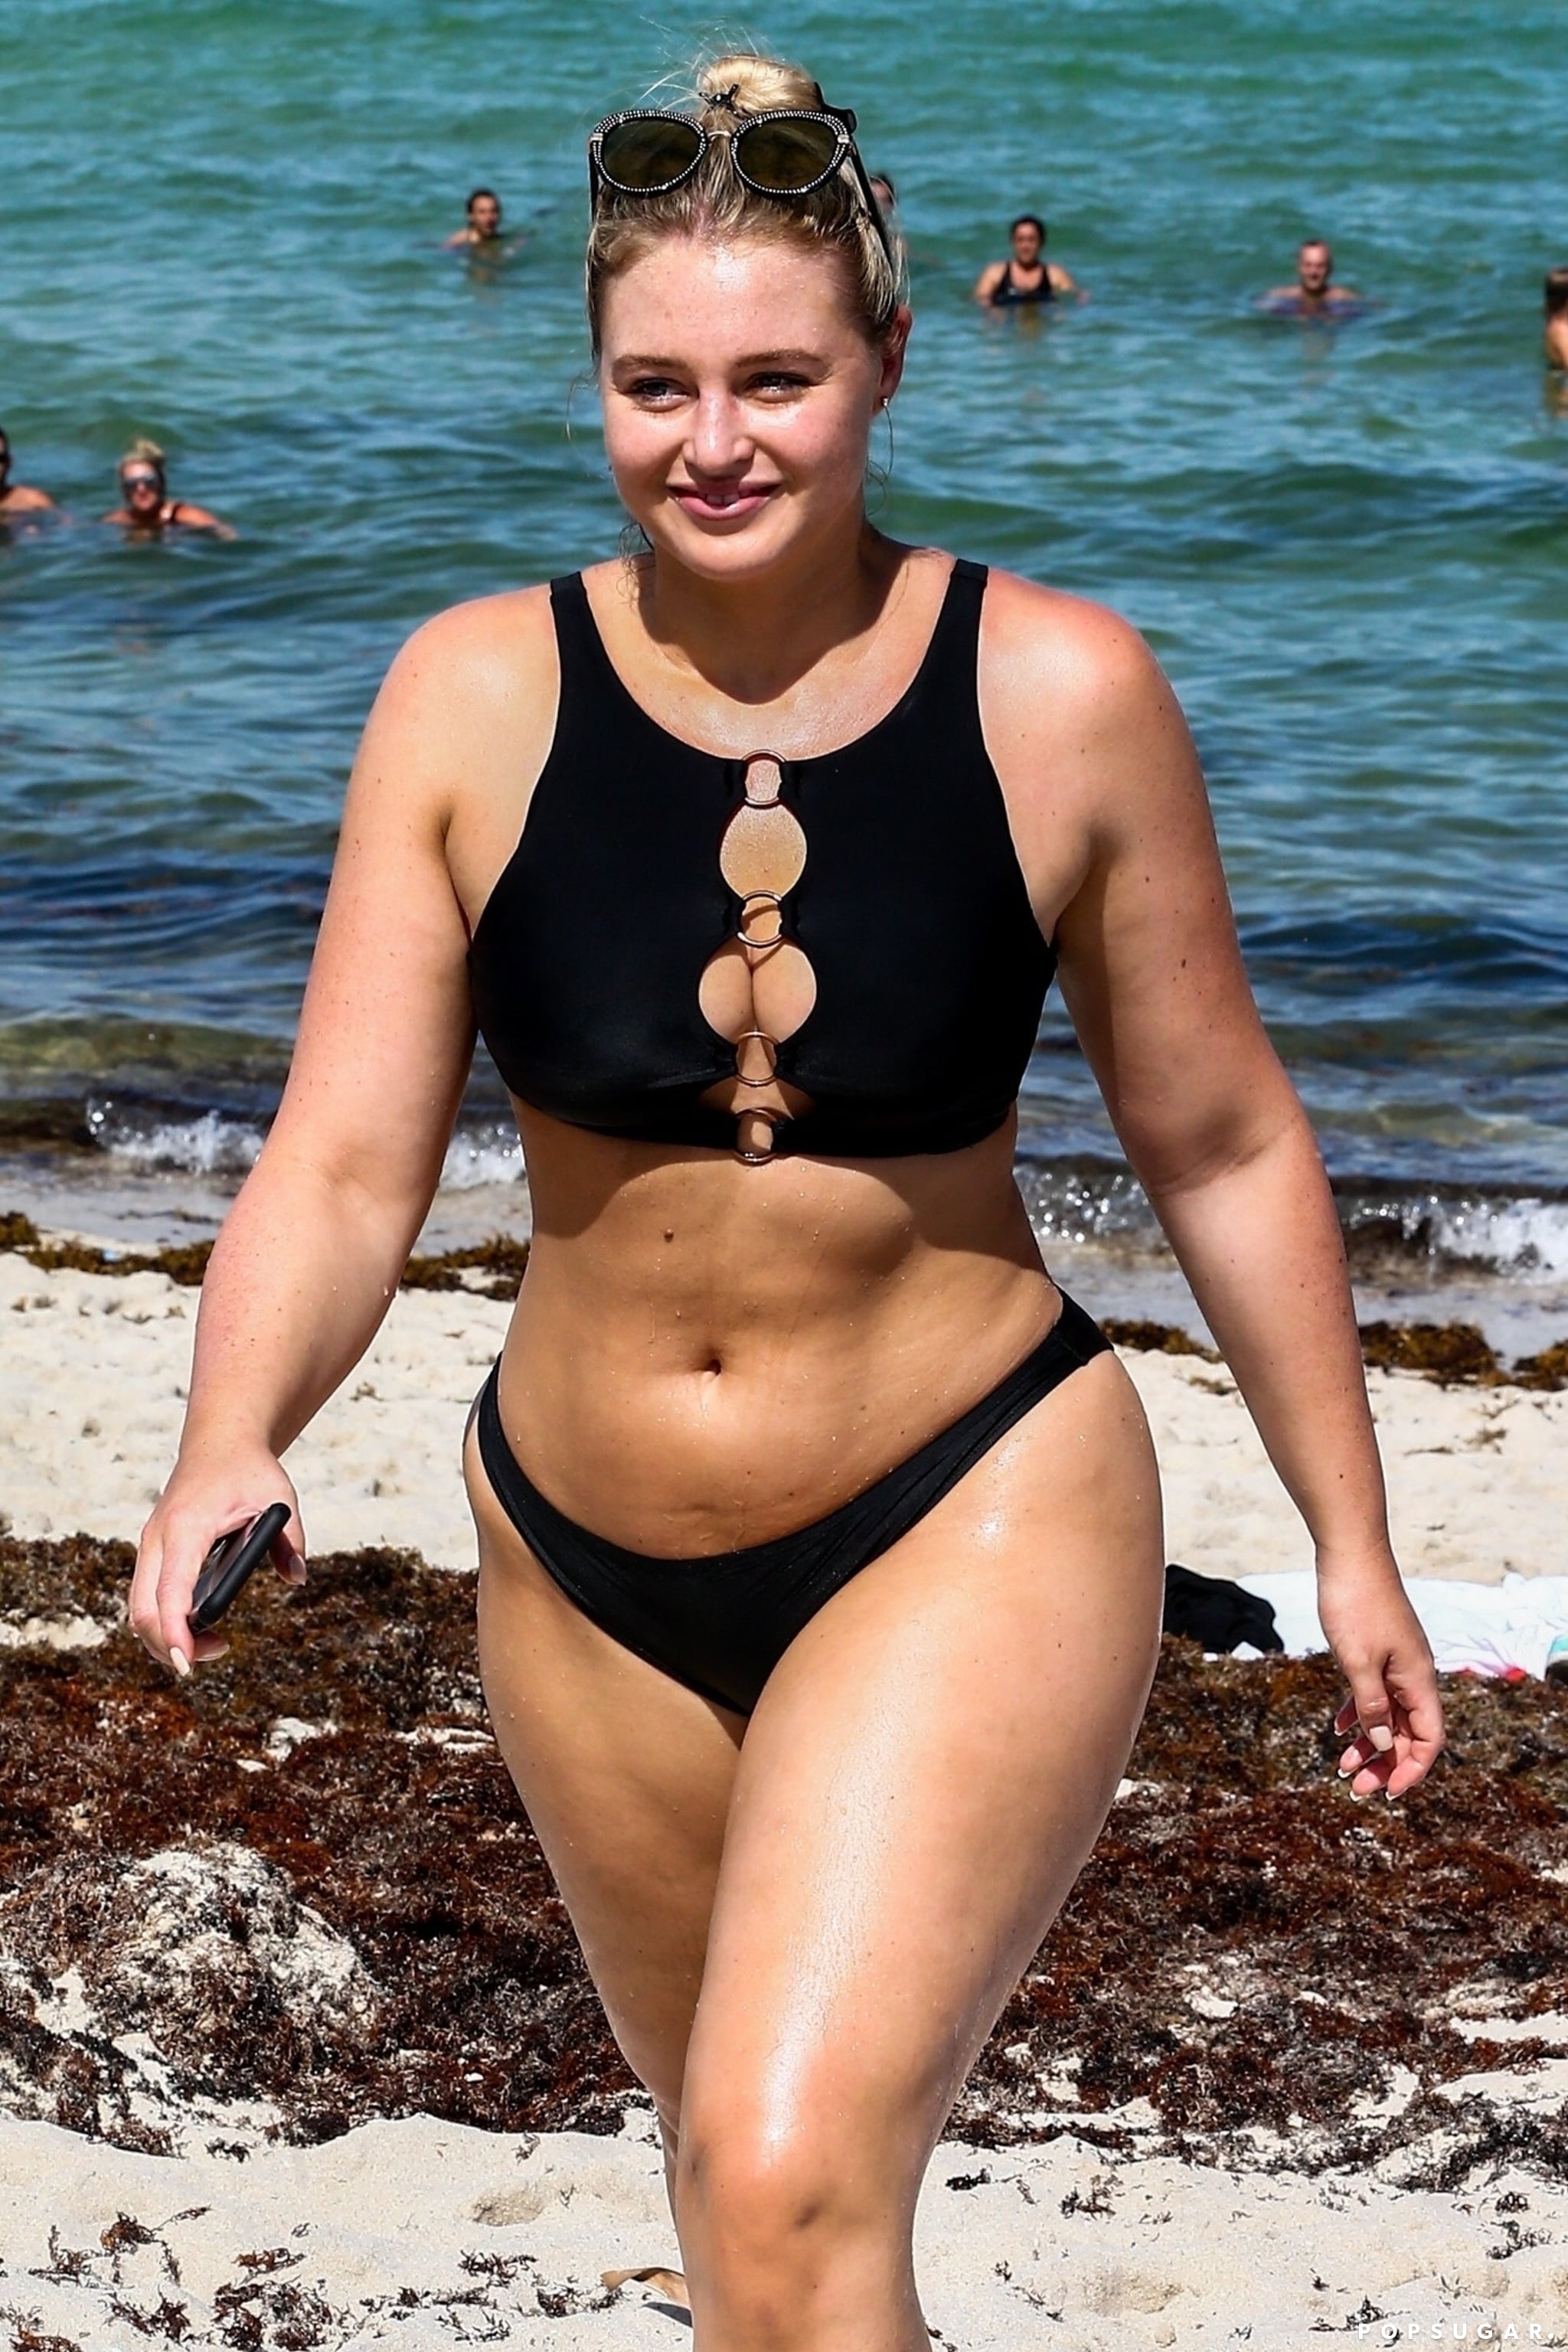 Iskra lawrence miami beach fire department sexy photos